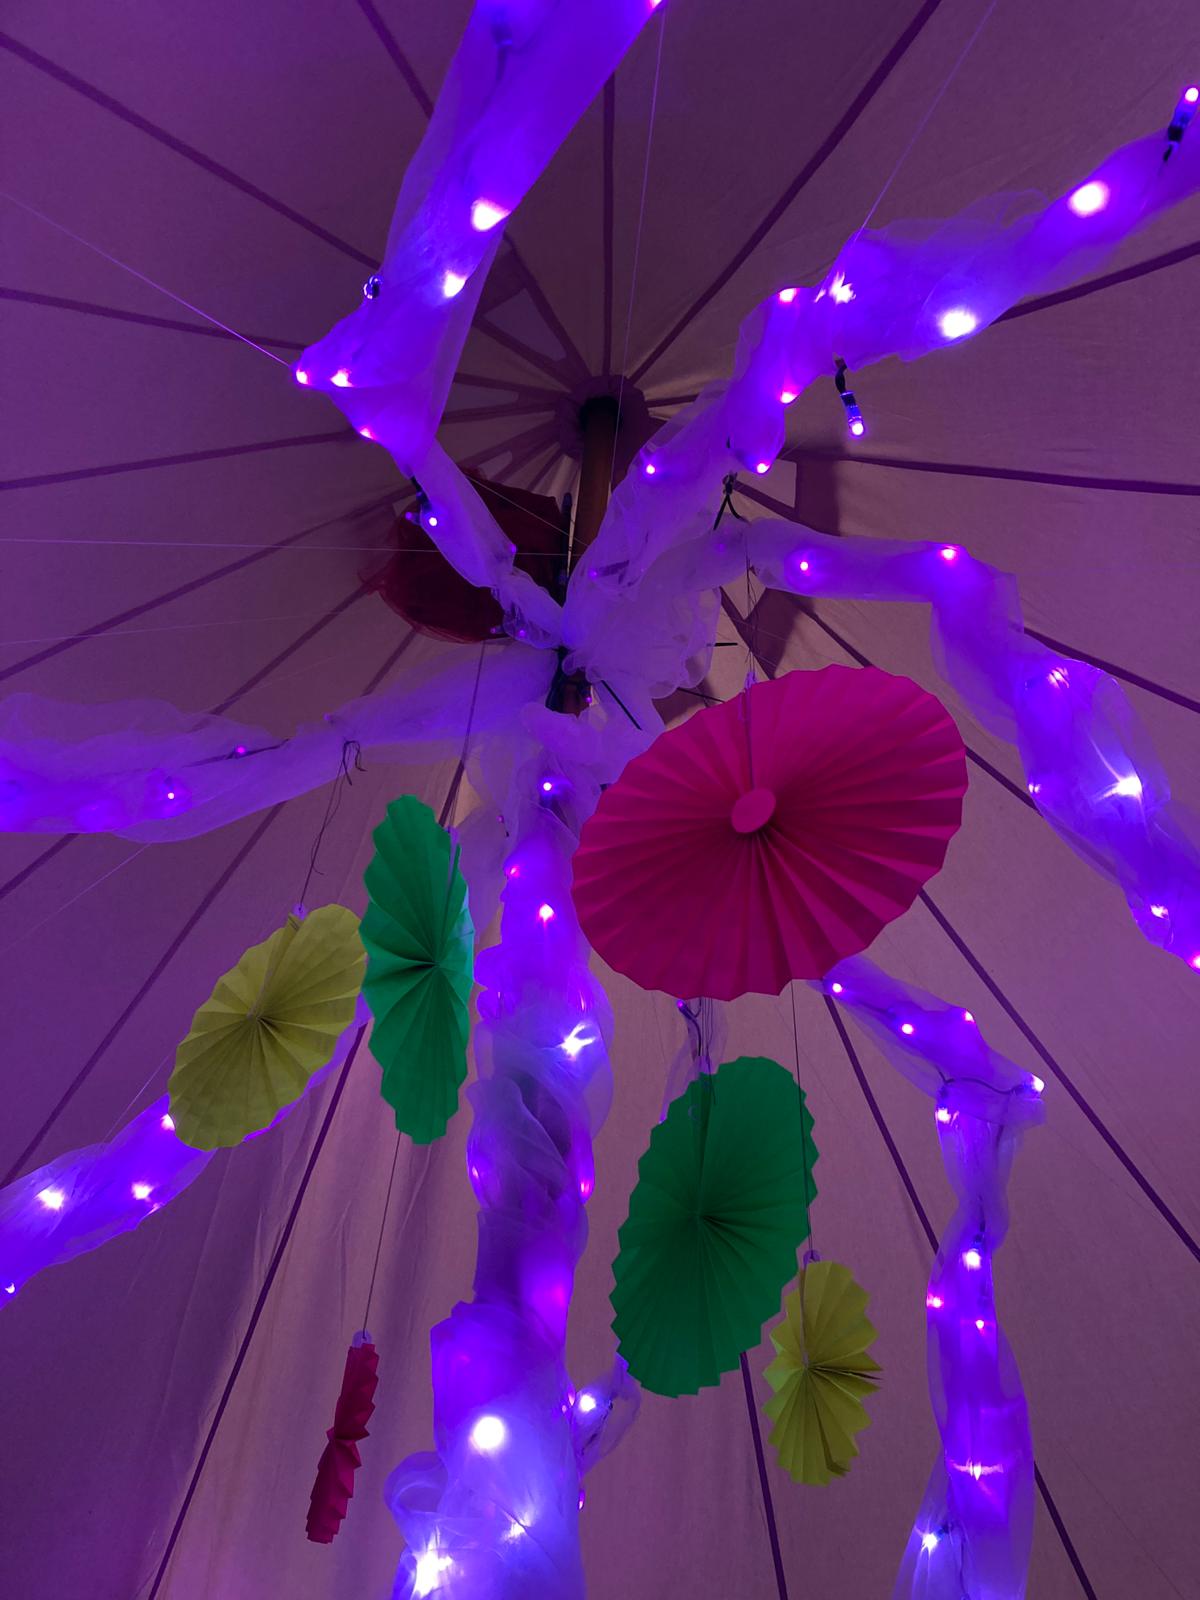 Inside the bell tent - spiral LEDs wrapped in organza.